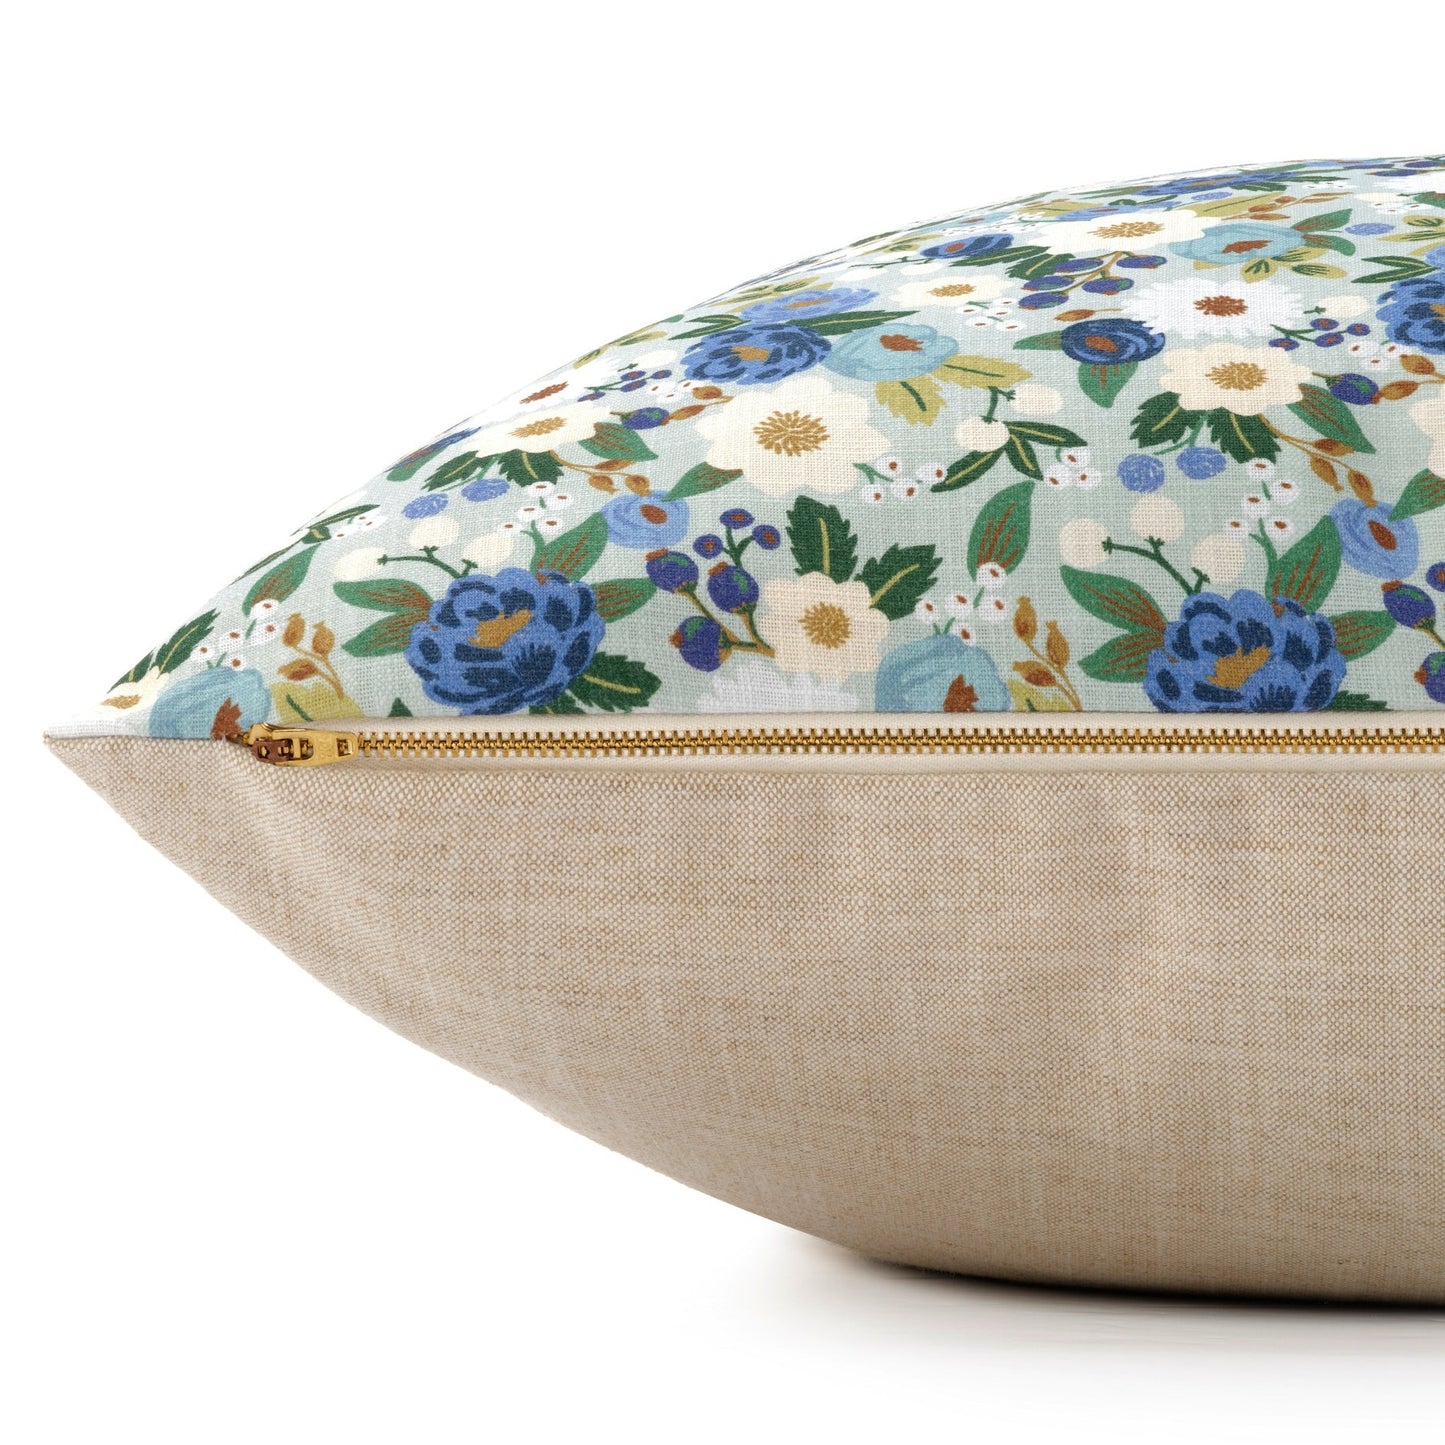 Rifle Paper Co. x TFD Vintage Blossom Dog Bed from The Foggy Dog